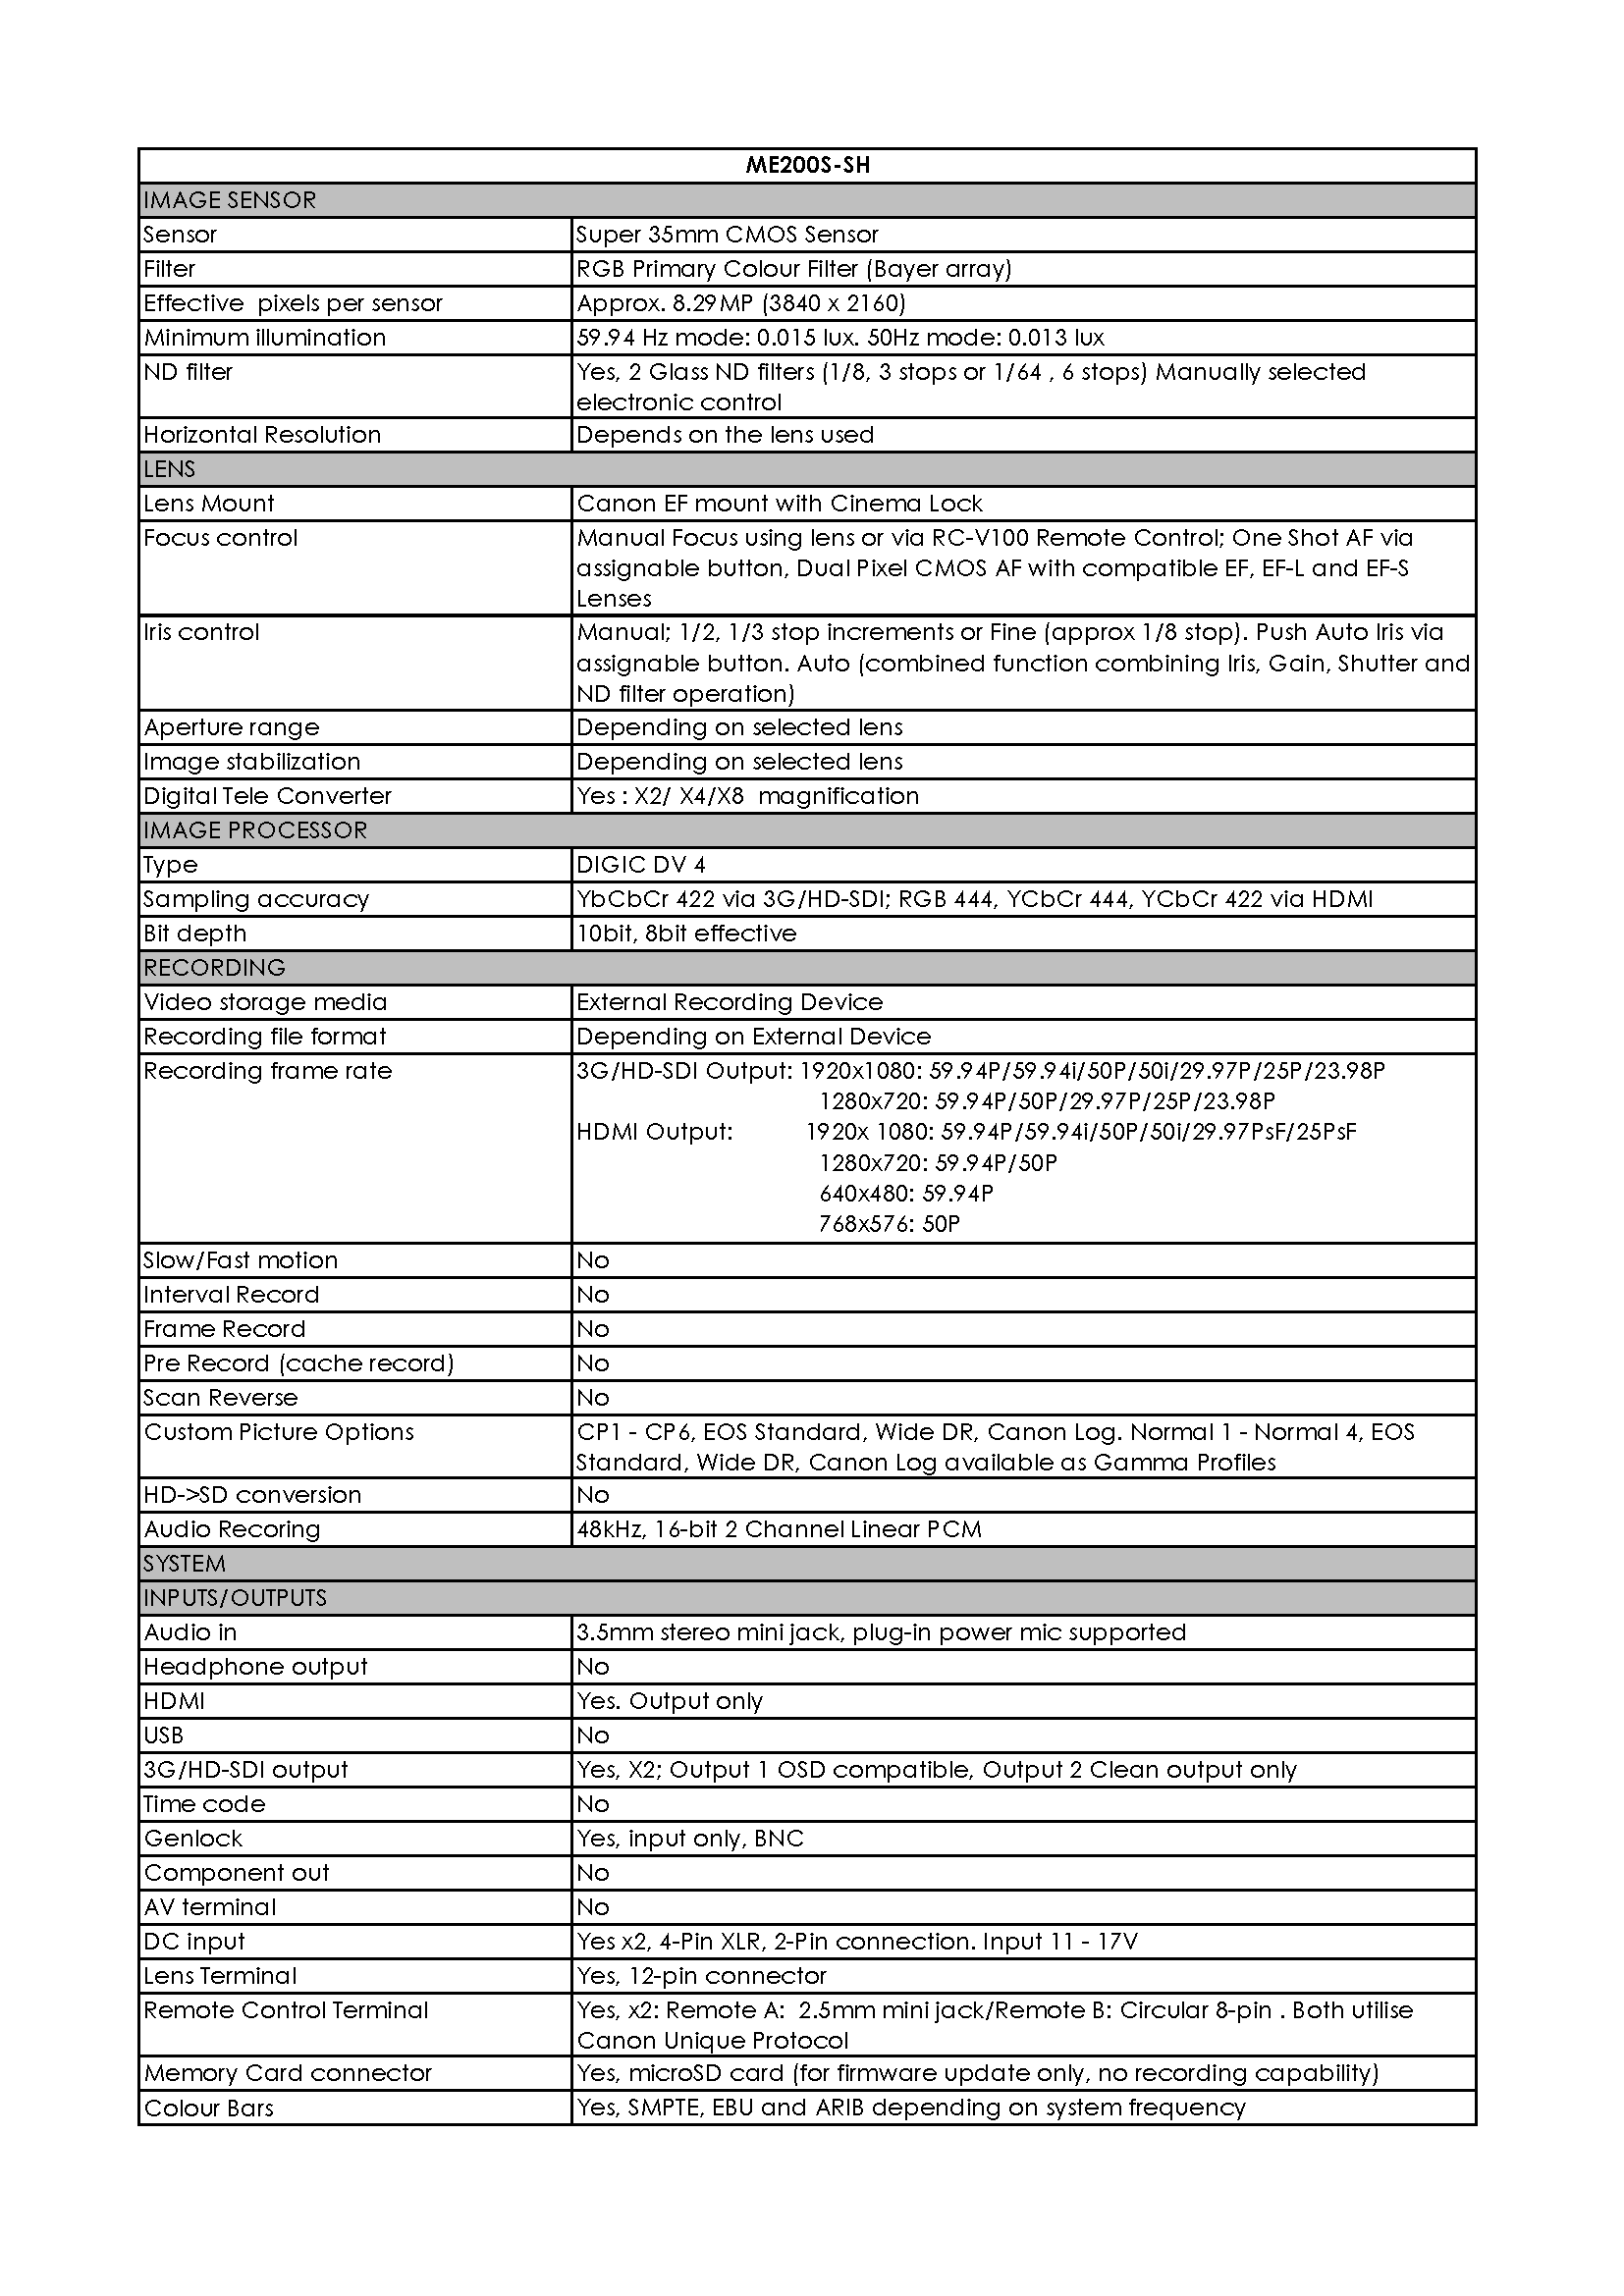 ME200S-SH spec sheet_Page_1.png